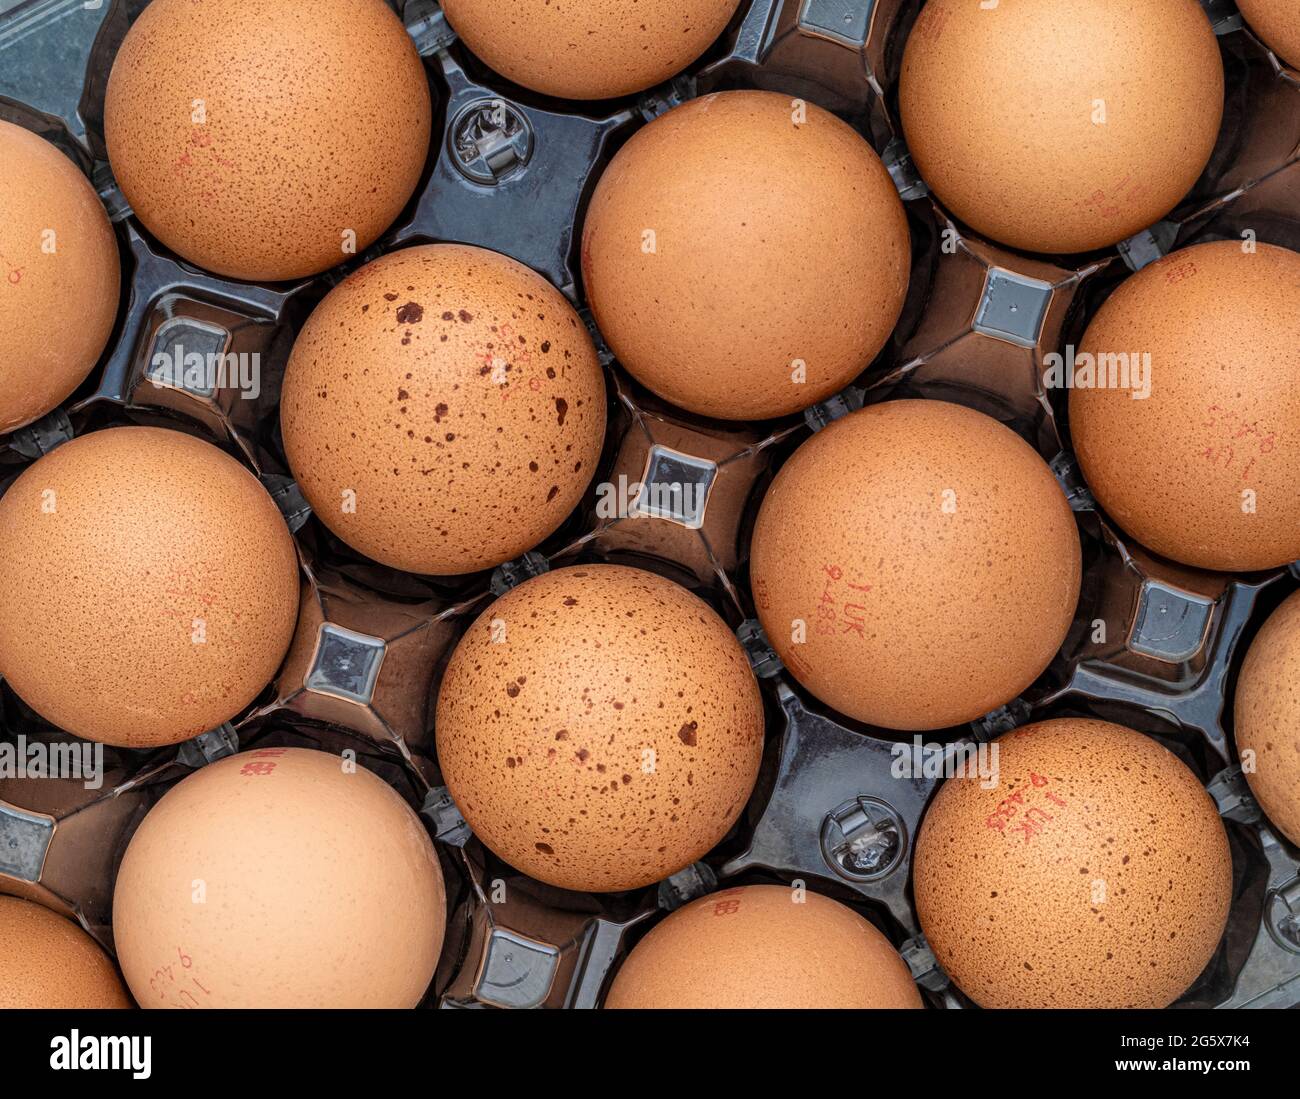 Plan view of brown eggs in a clear plastic carton on a grey background. Stock Photo